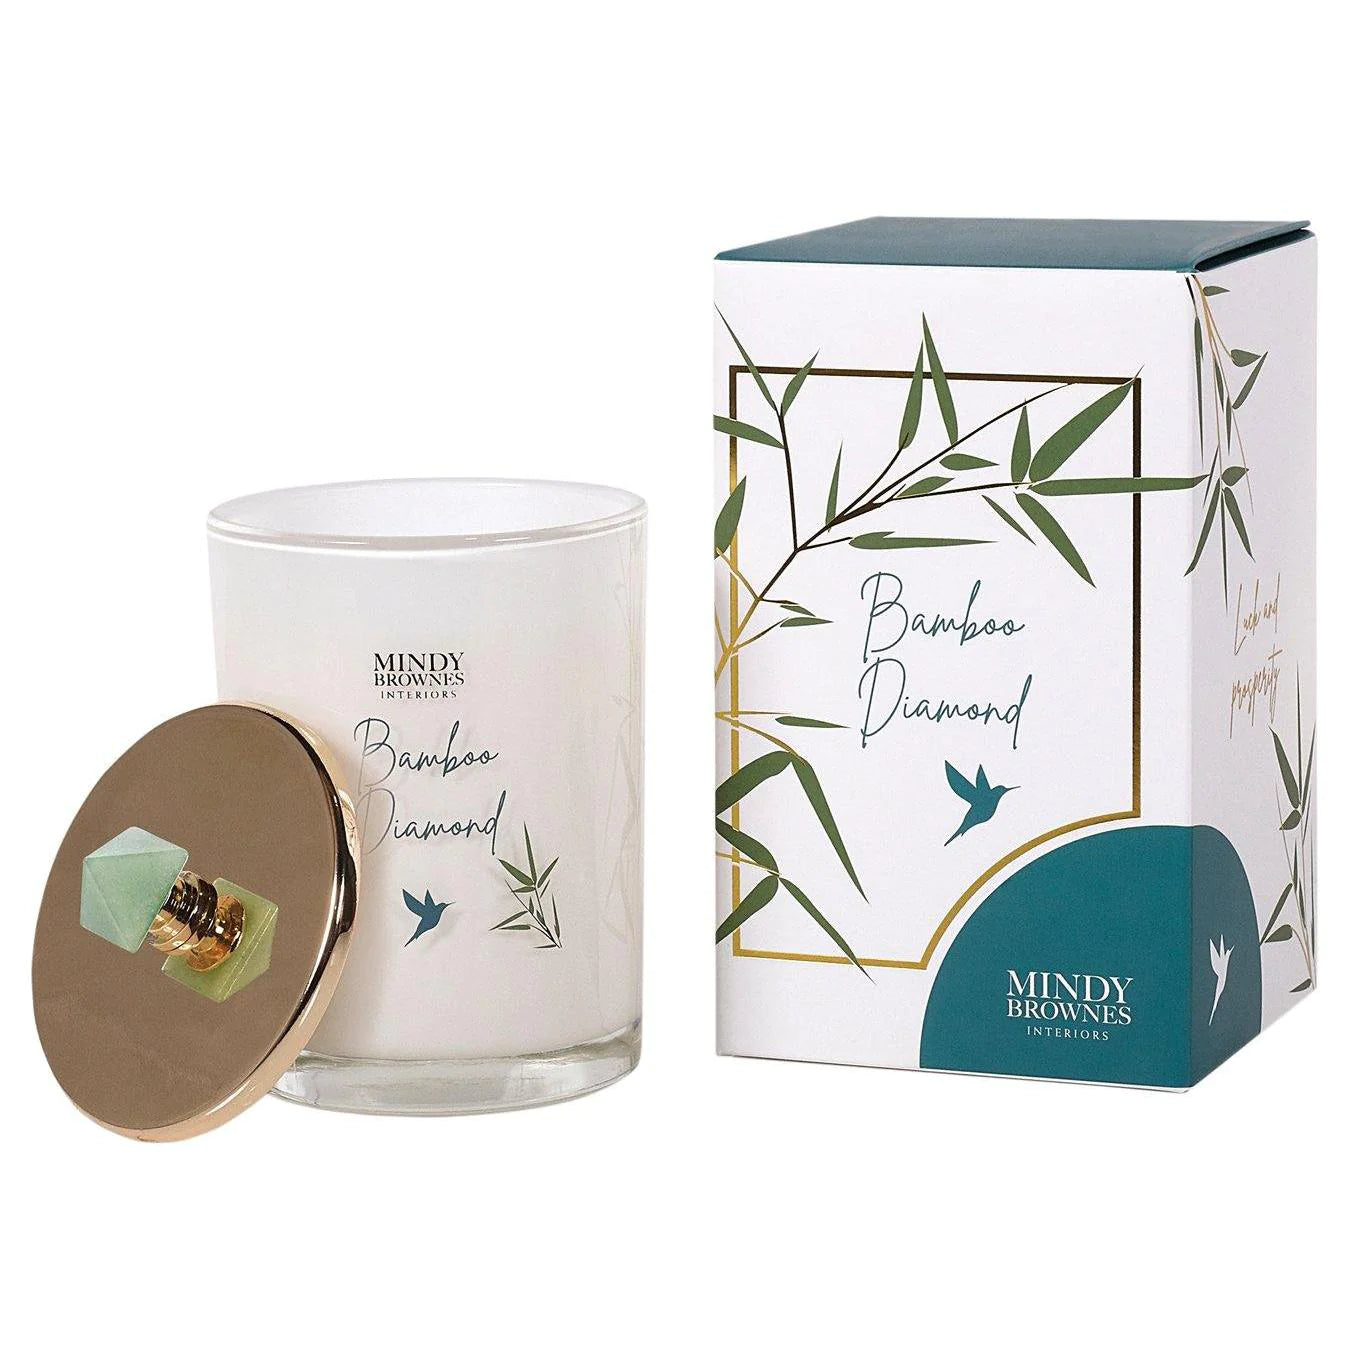 Mindy Brownes Scented Candles - Bamboo Diamond